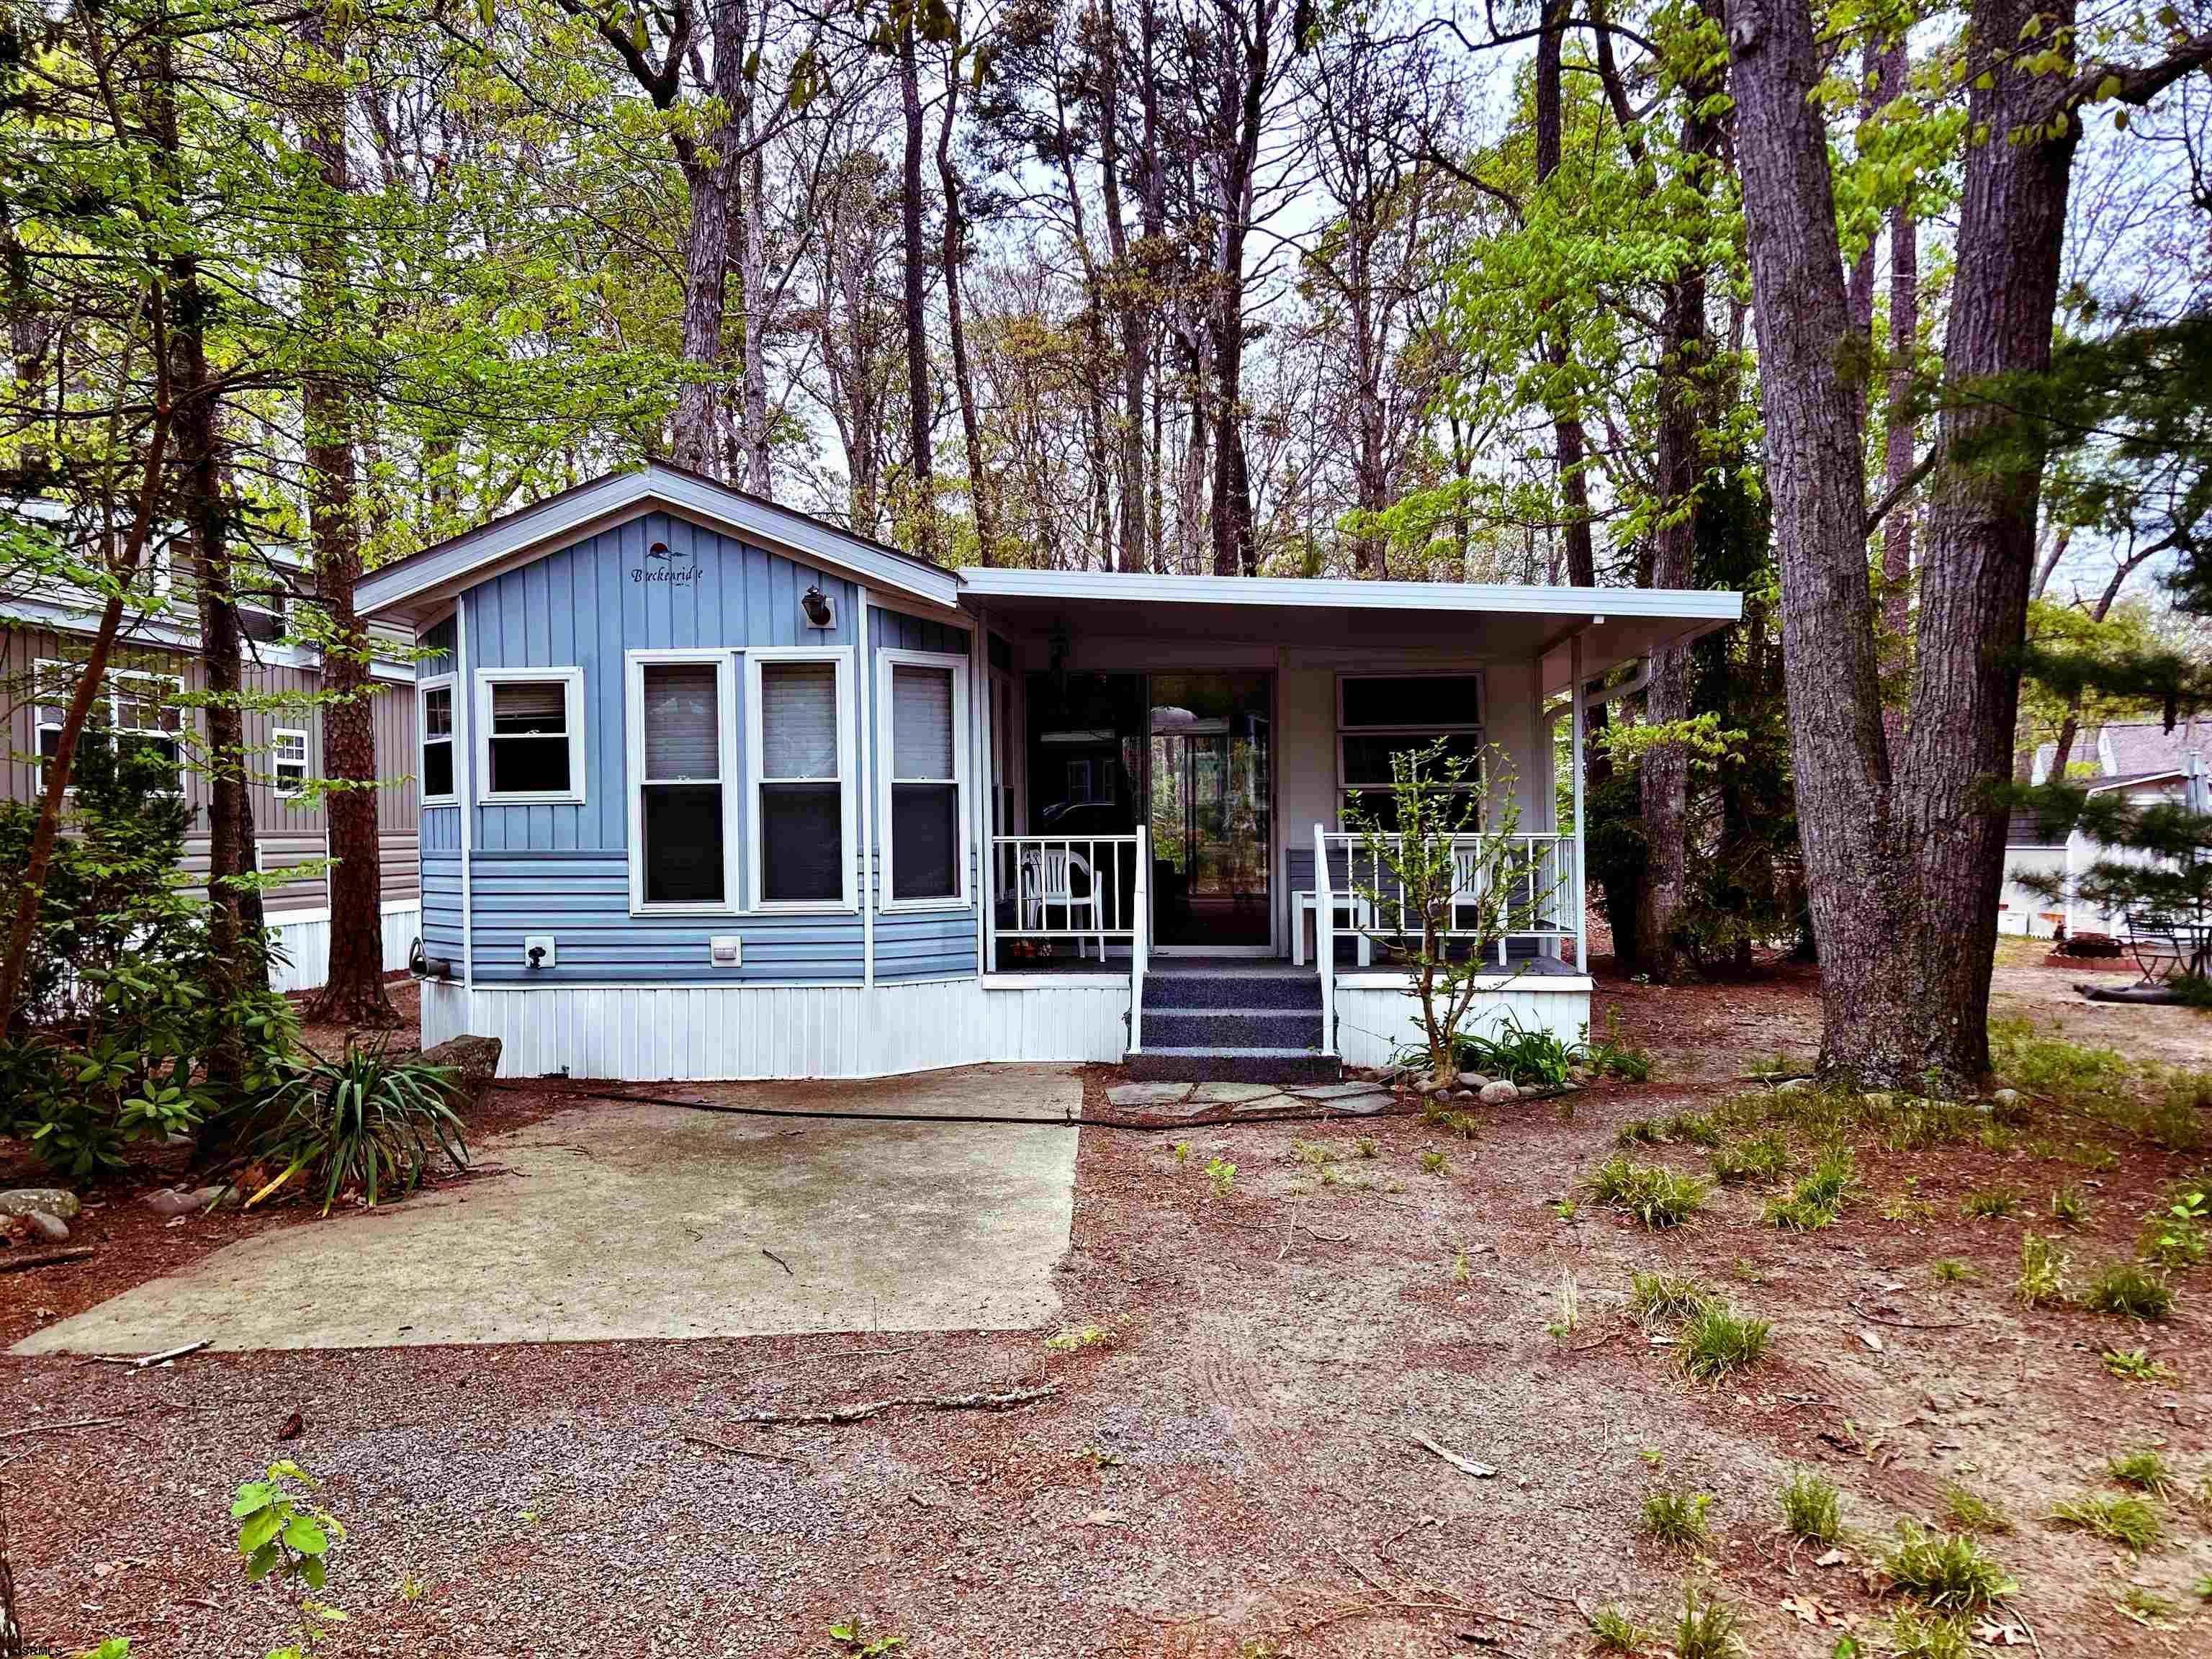 a view of a house with a yard porch and sitting area